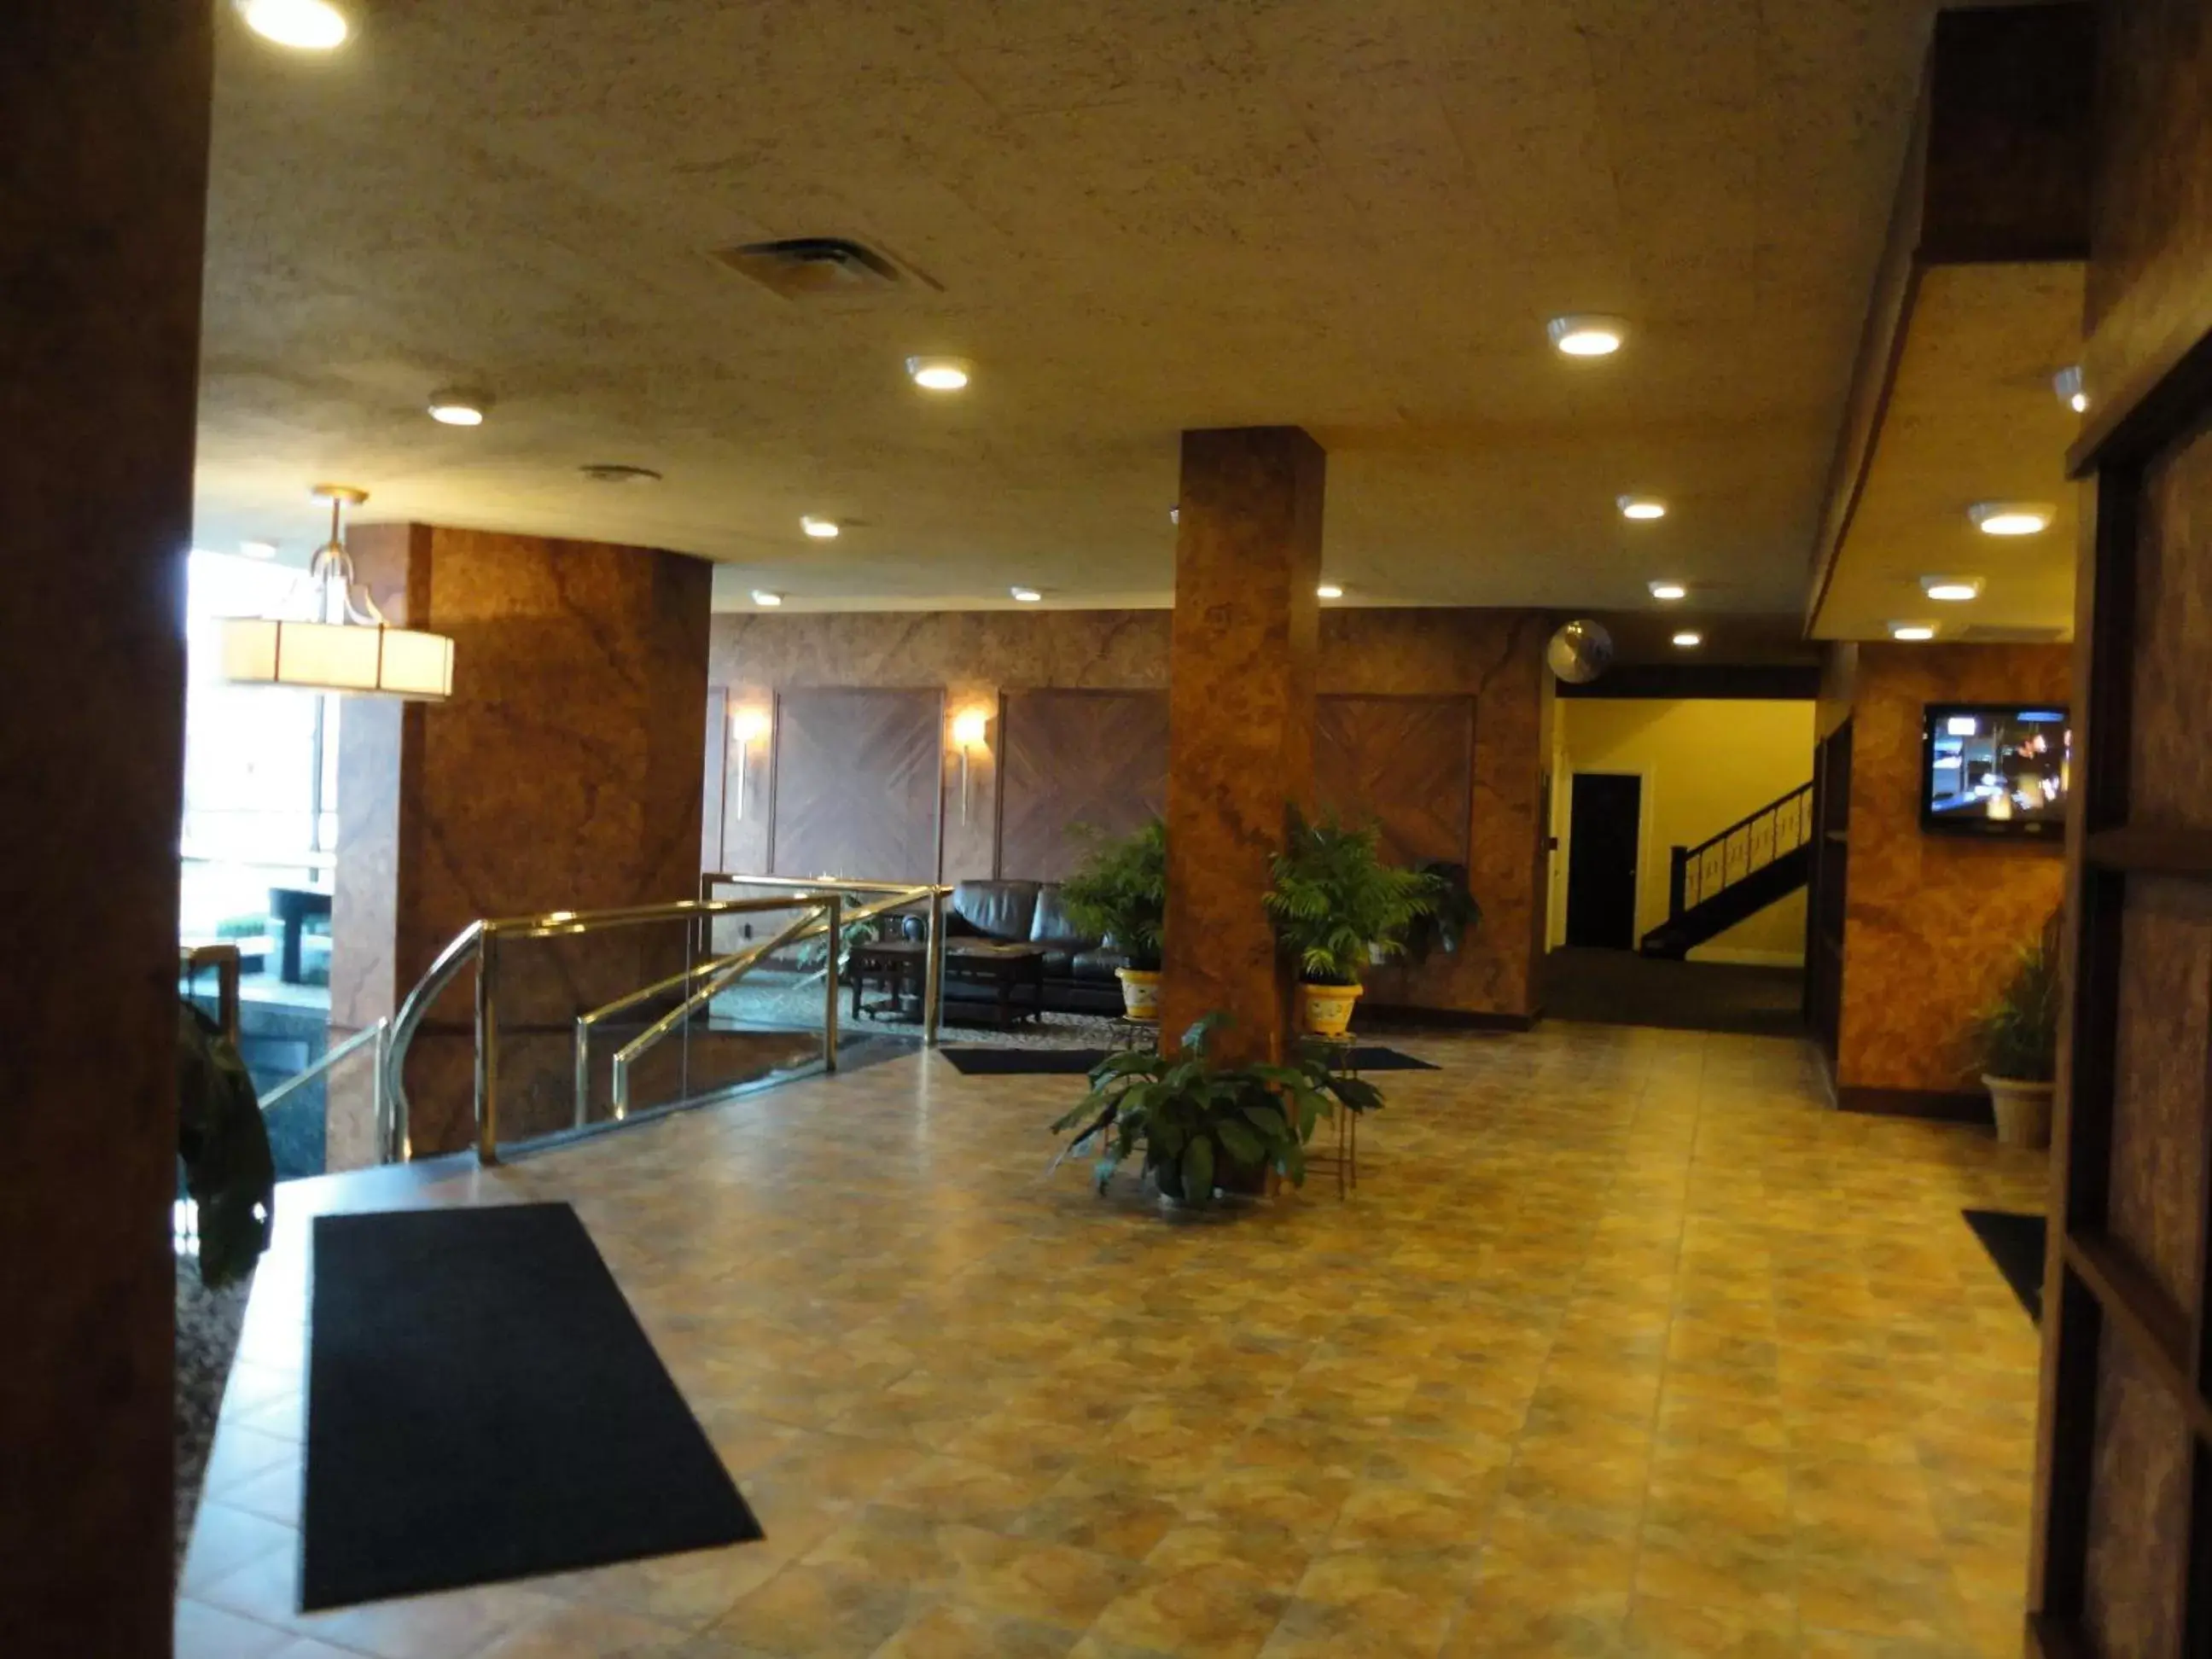 Seating area, Lobby/Reception in Lenox Hotel and Suites